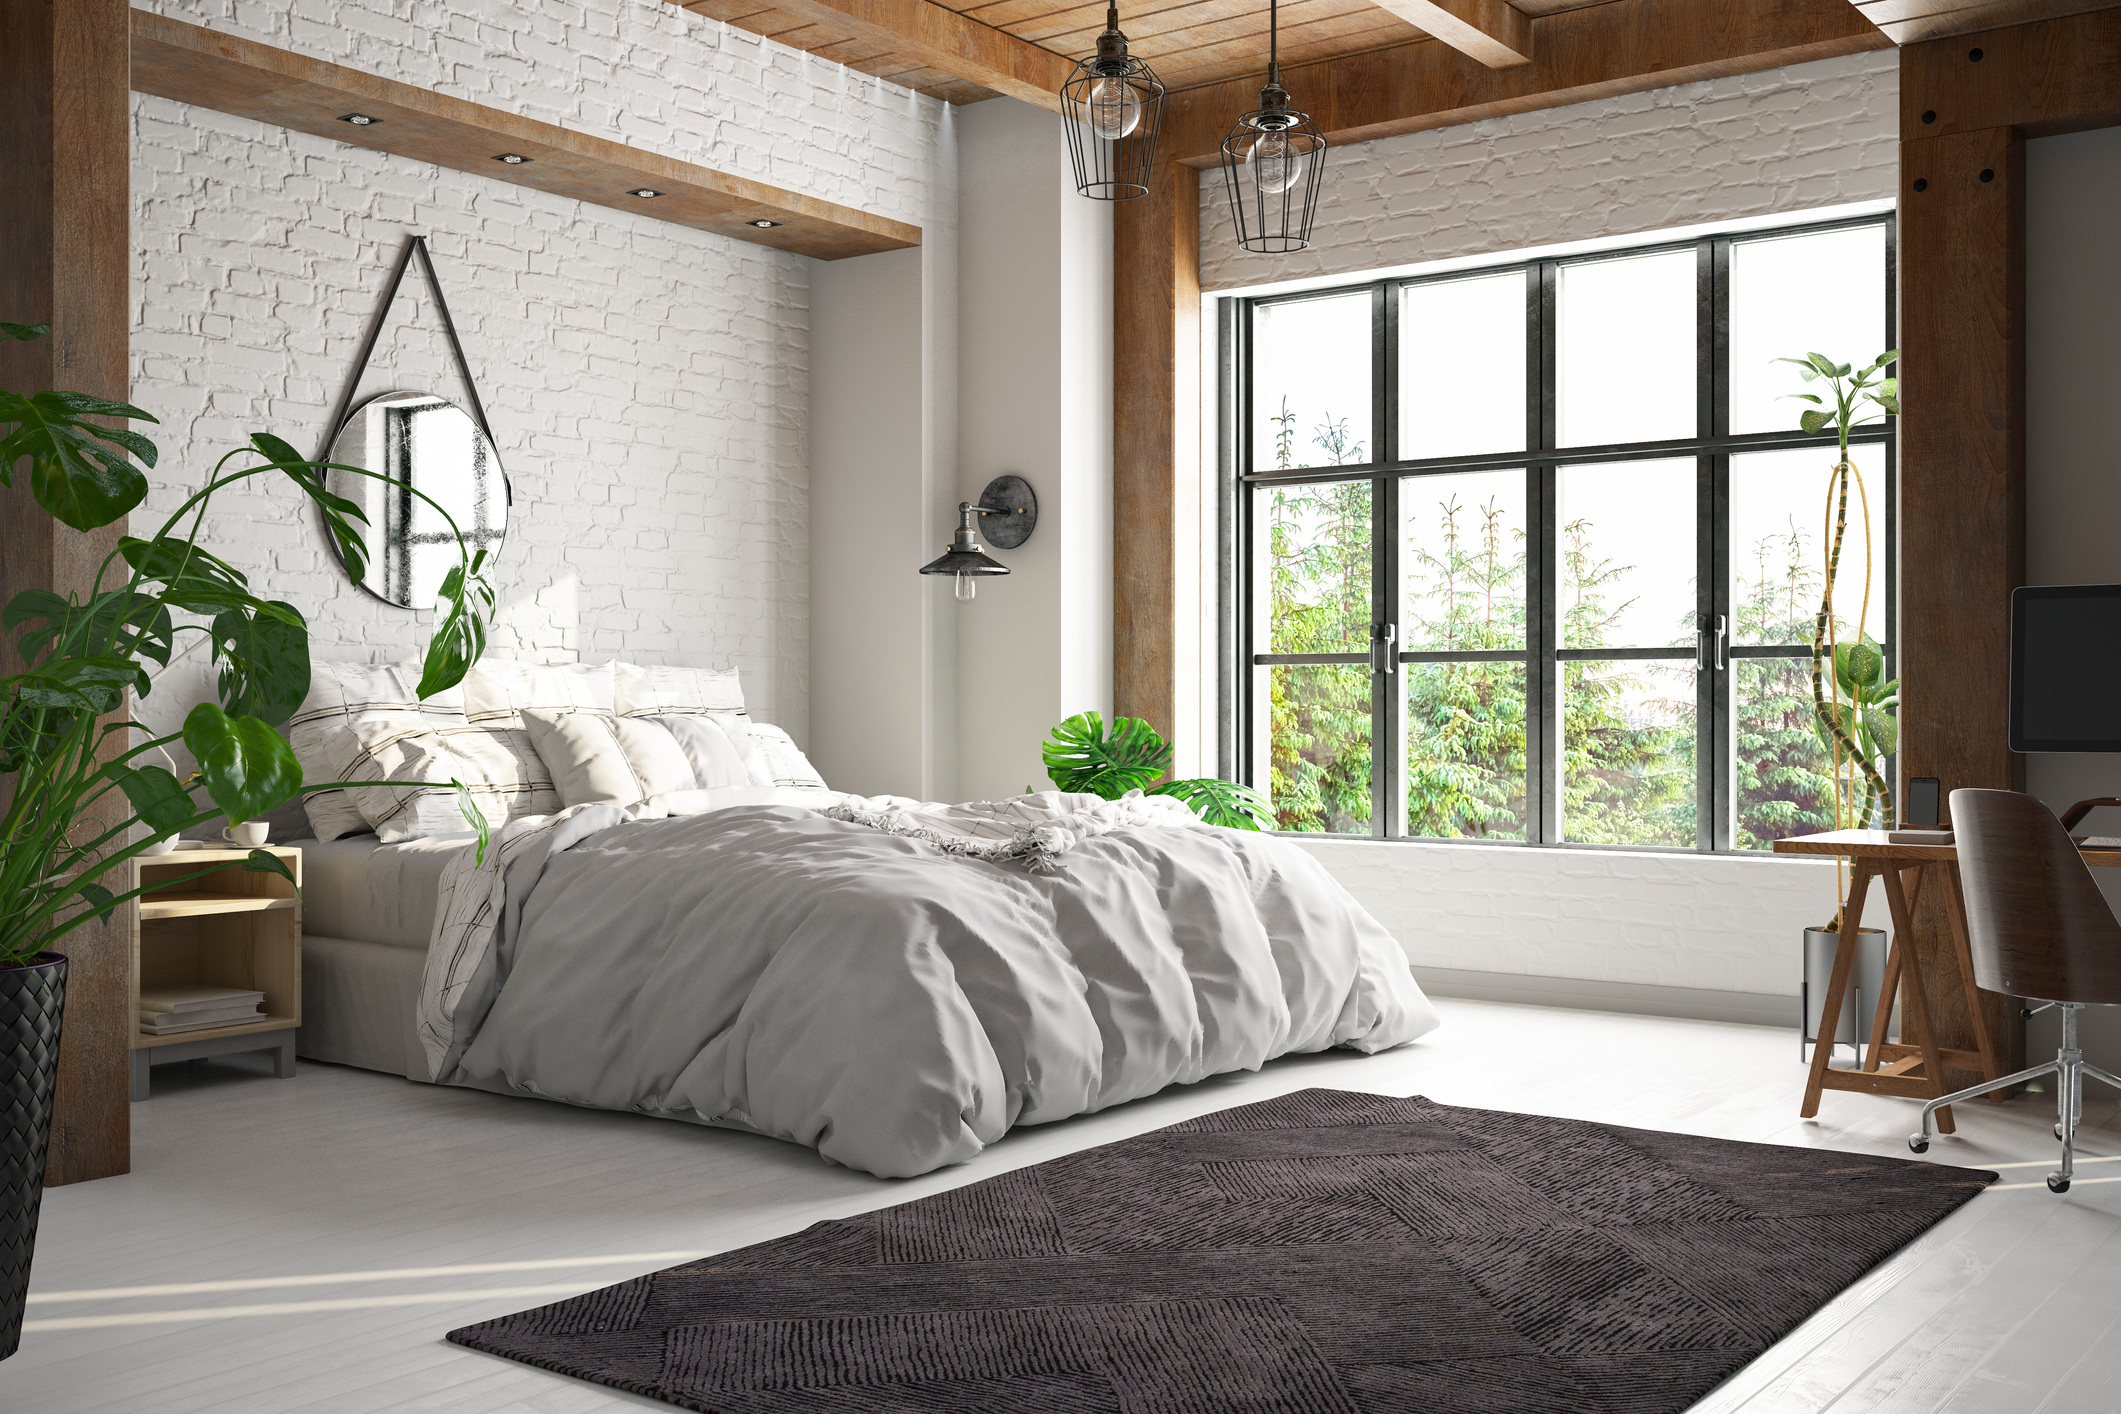 Styling Tips to Create the Bedroom of Your Dreams